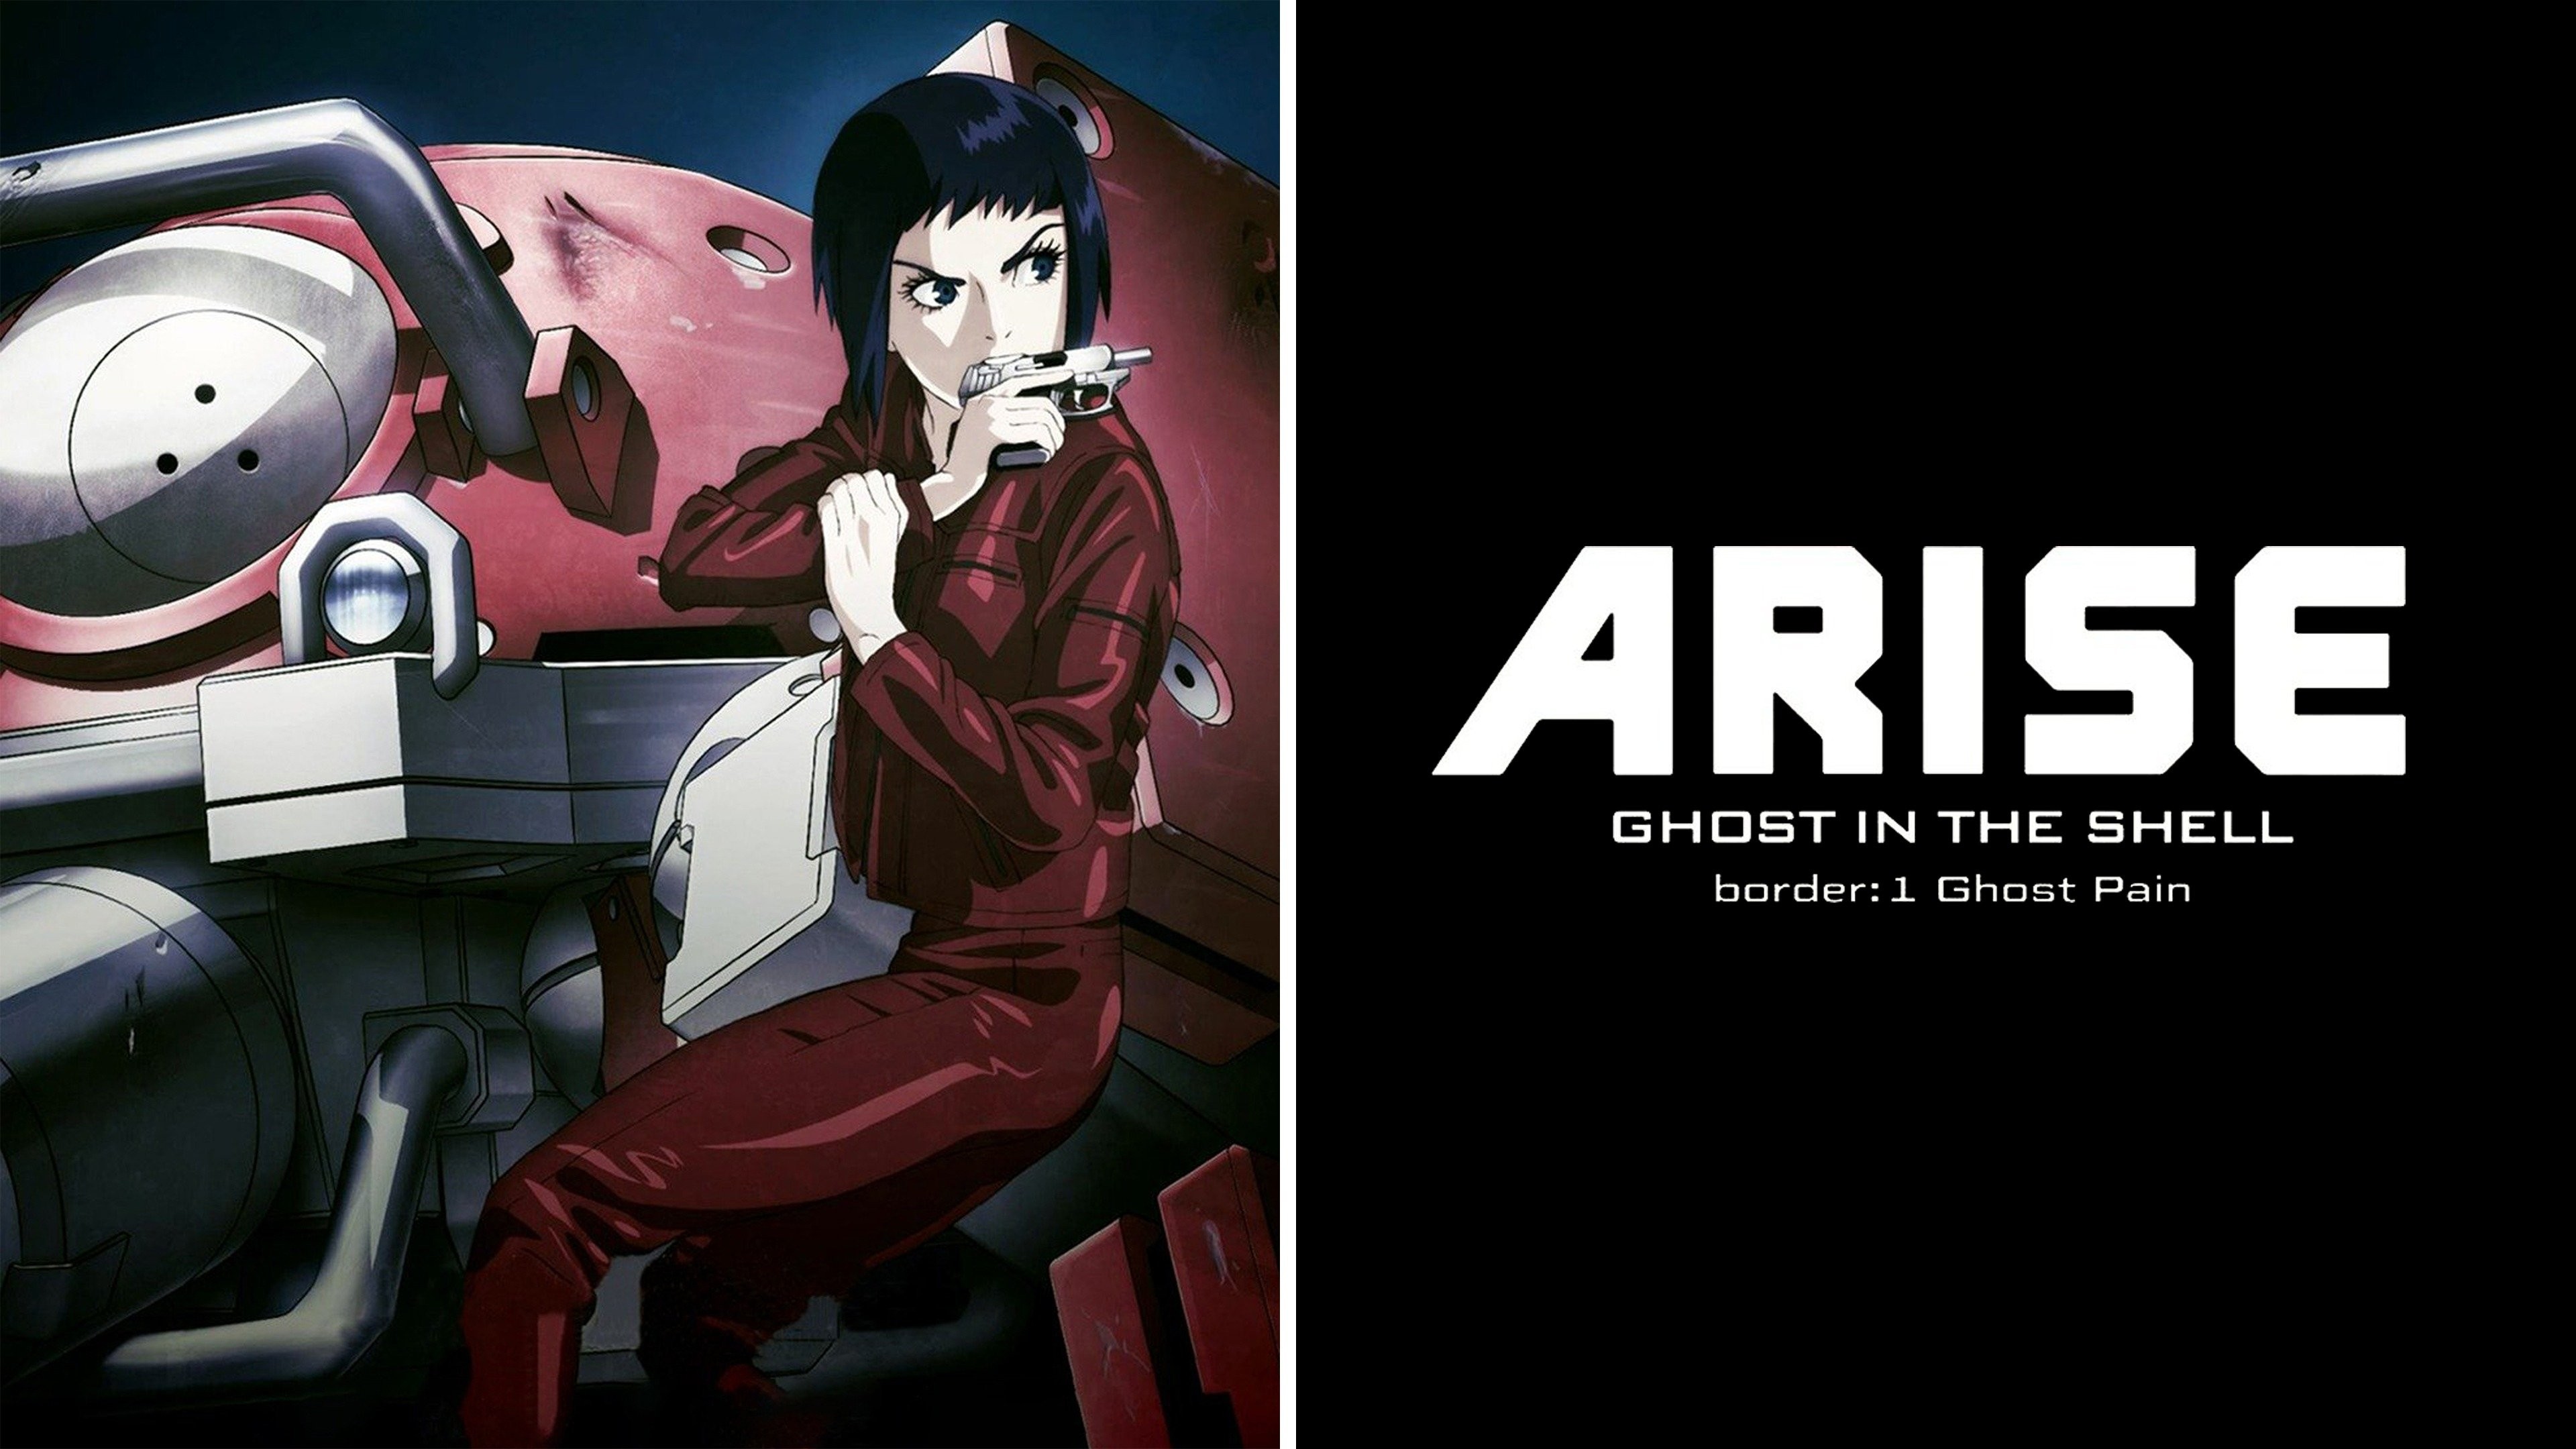 GHOST IN THE SHELL ARISE COMPLETE OVA ANIME DVD English Subtitle | eBay